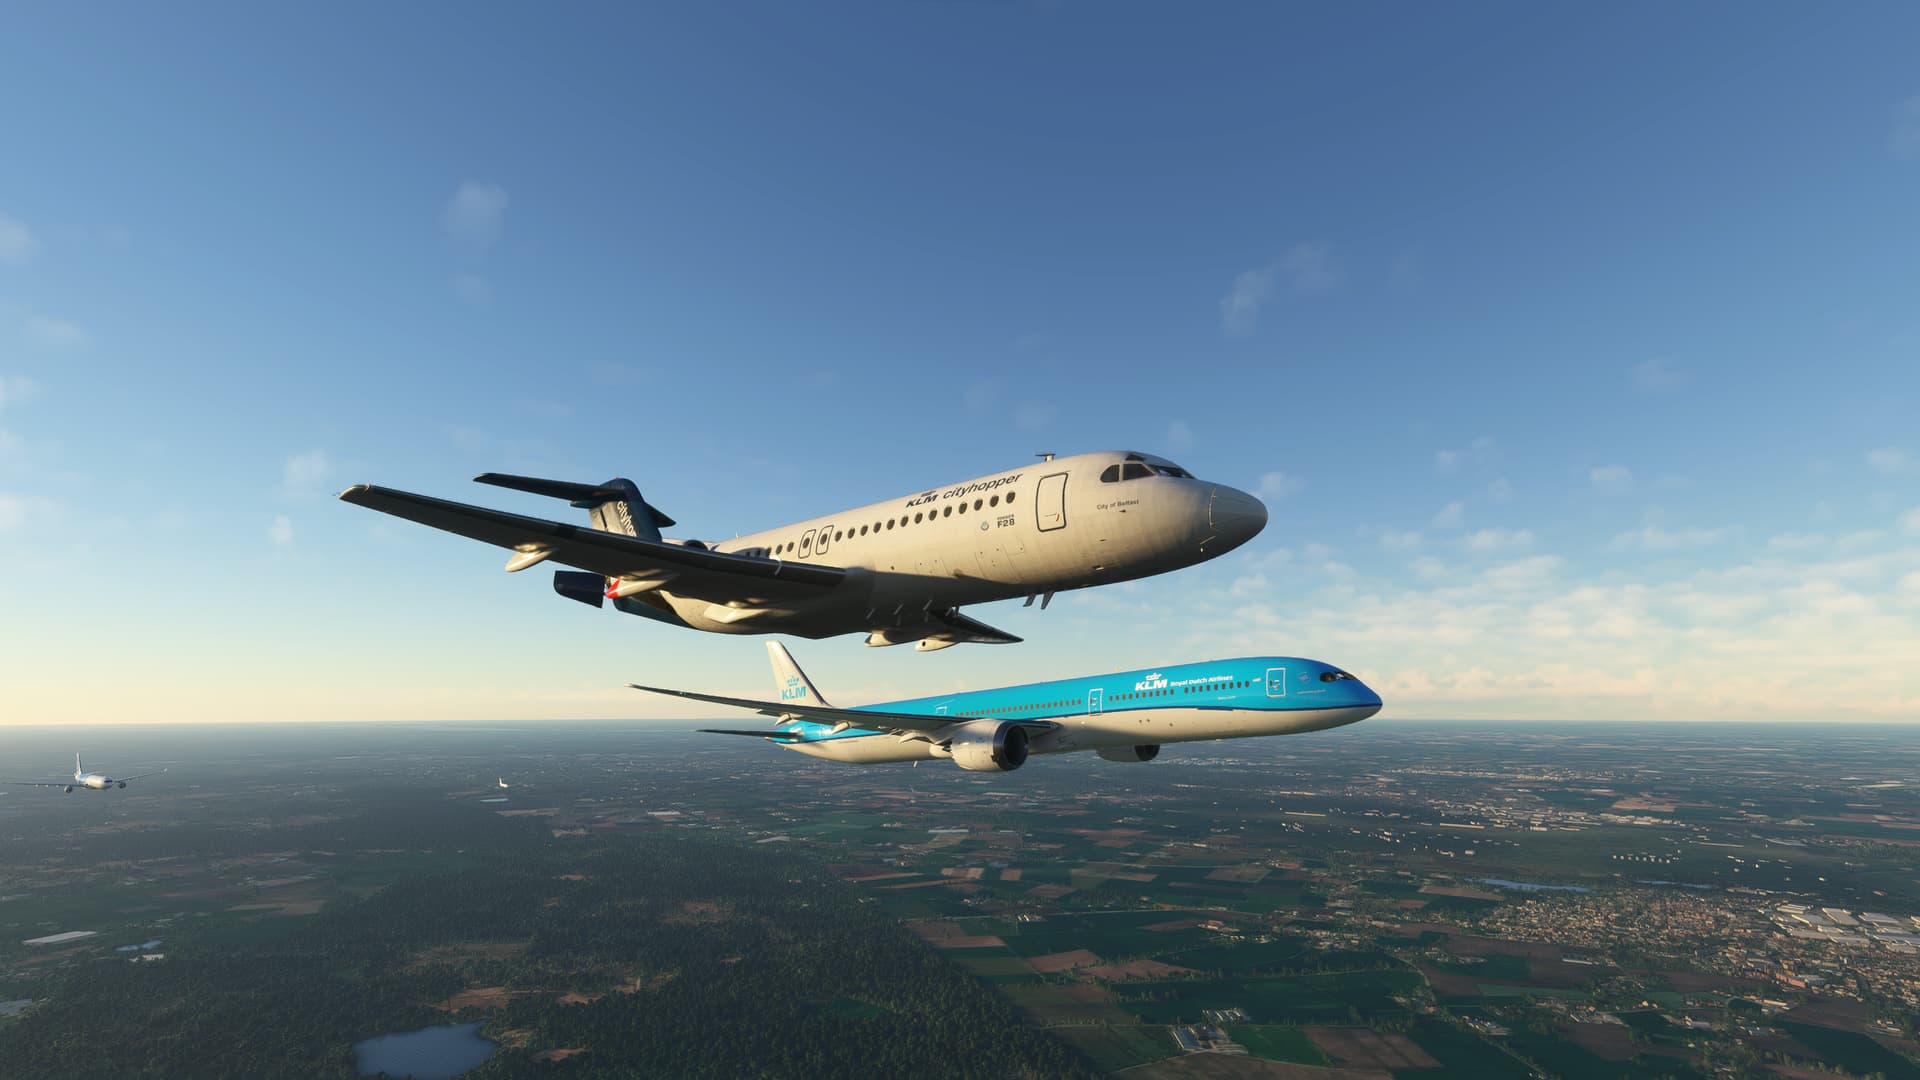 Microsoft Flight Simulator ✈️ on X: For our Community Fly-In this Friday,  we're flying to Benelux - Belgium, the Netherlands, and Luxembourg! 🇧🇪  🇳🇱 🇱🇺 ⏰ Please note that we will be